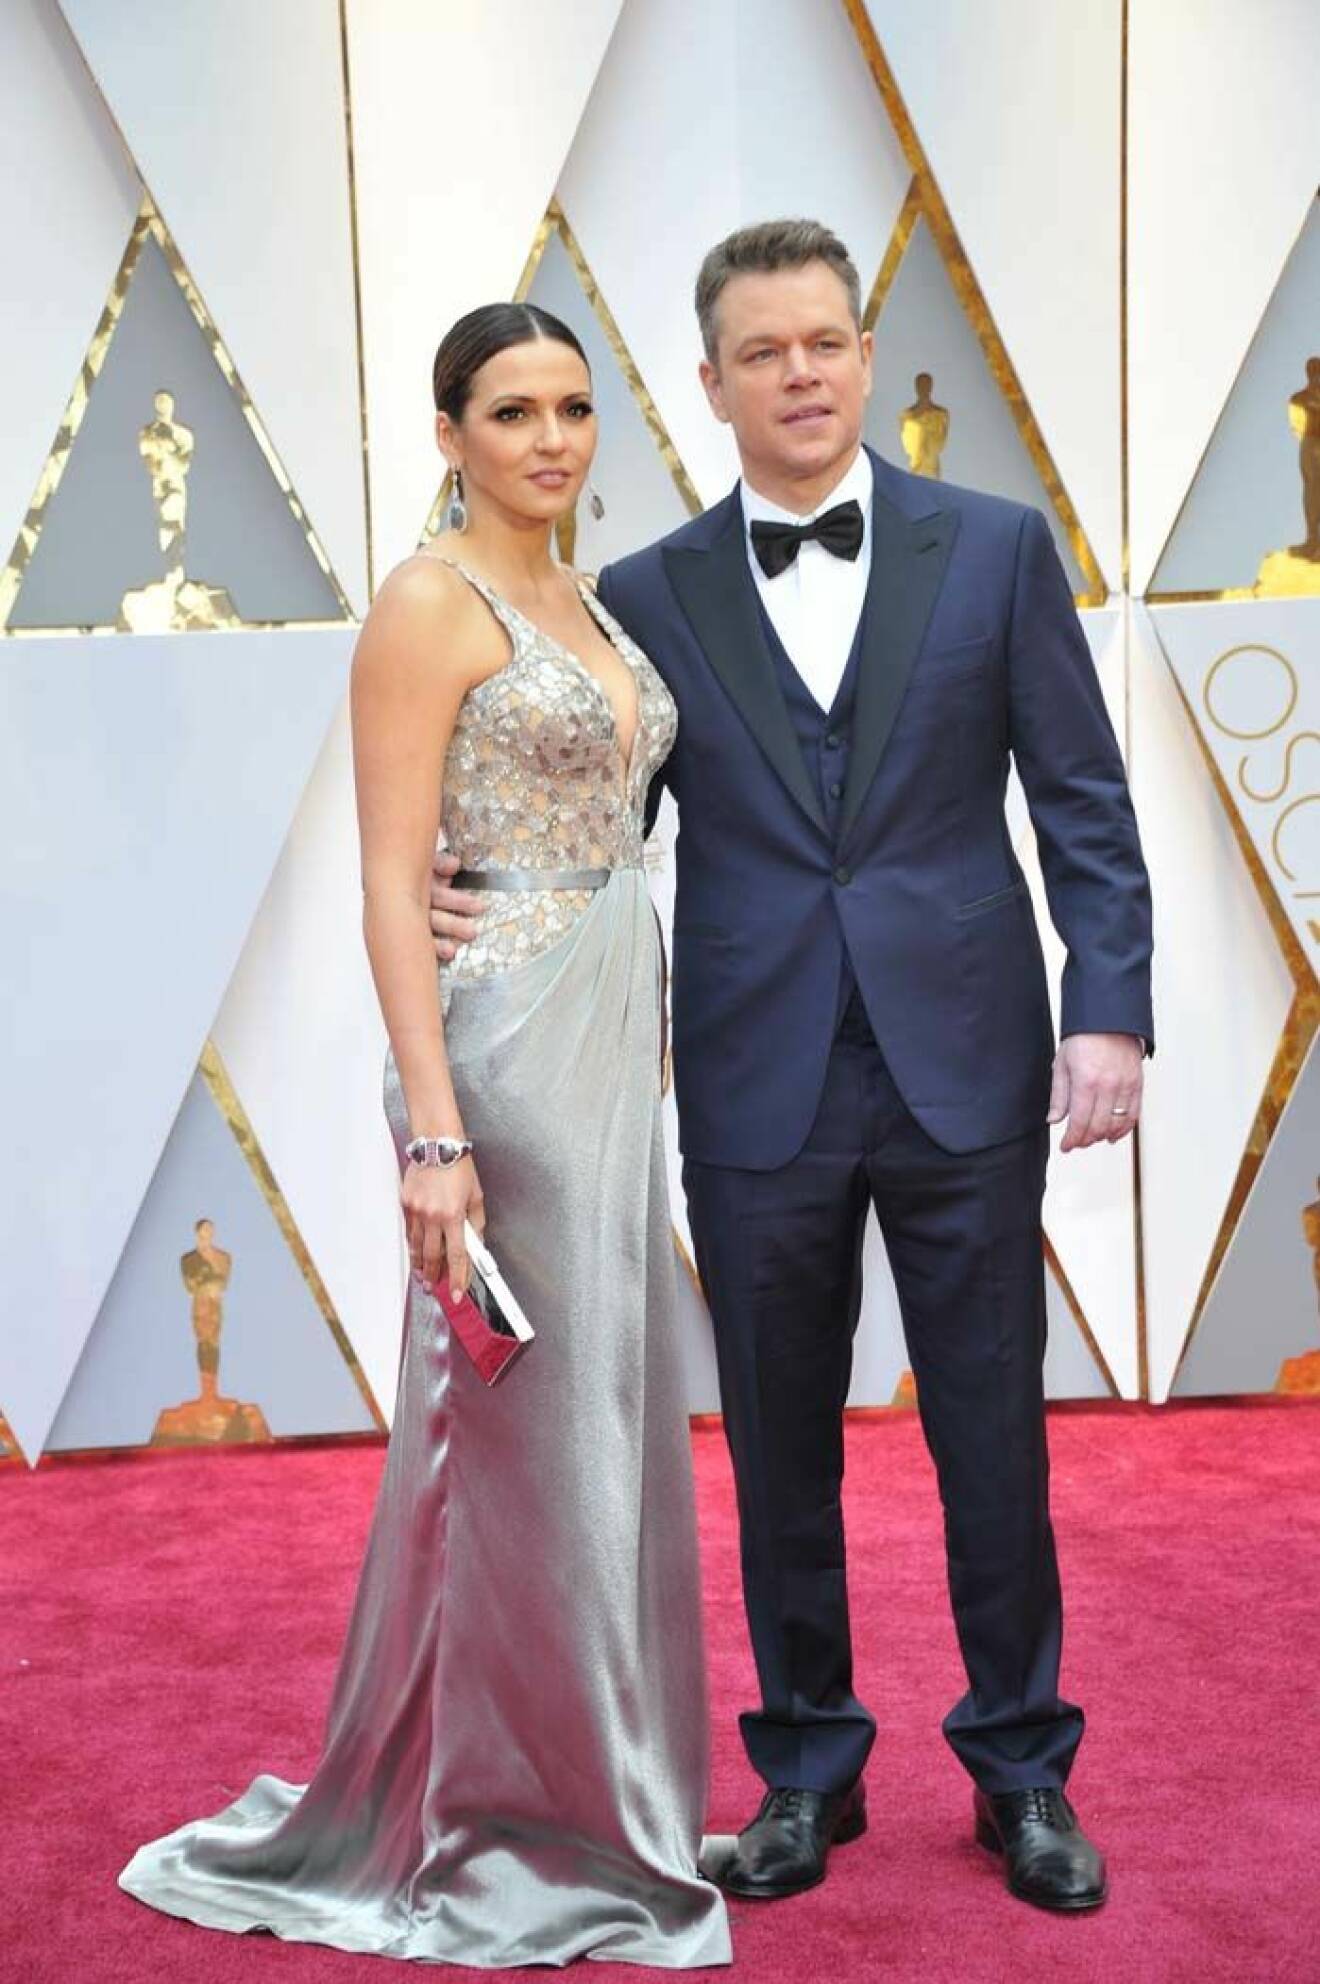 LOS ANGELES, CA - FEBRUARY 26: Luciana Barroso and Matt Damon at the 89th Academy Awards at the Dolby Theatre in Los Angeles, California on February 26, 2017. Credit: mpi99/MediaPunch